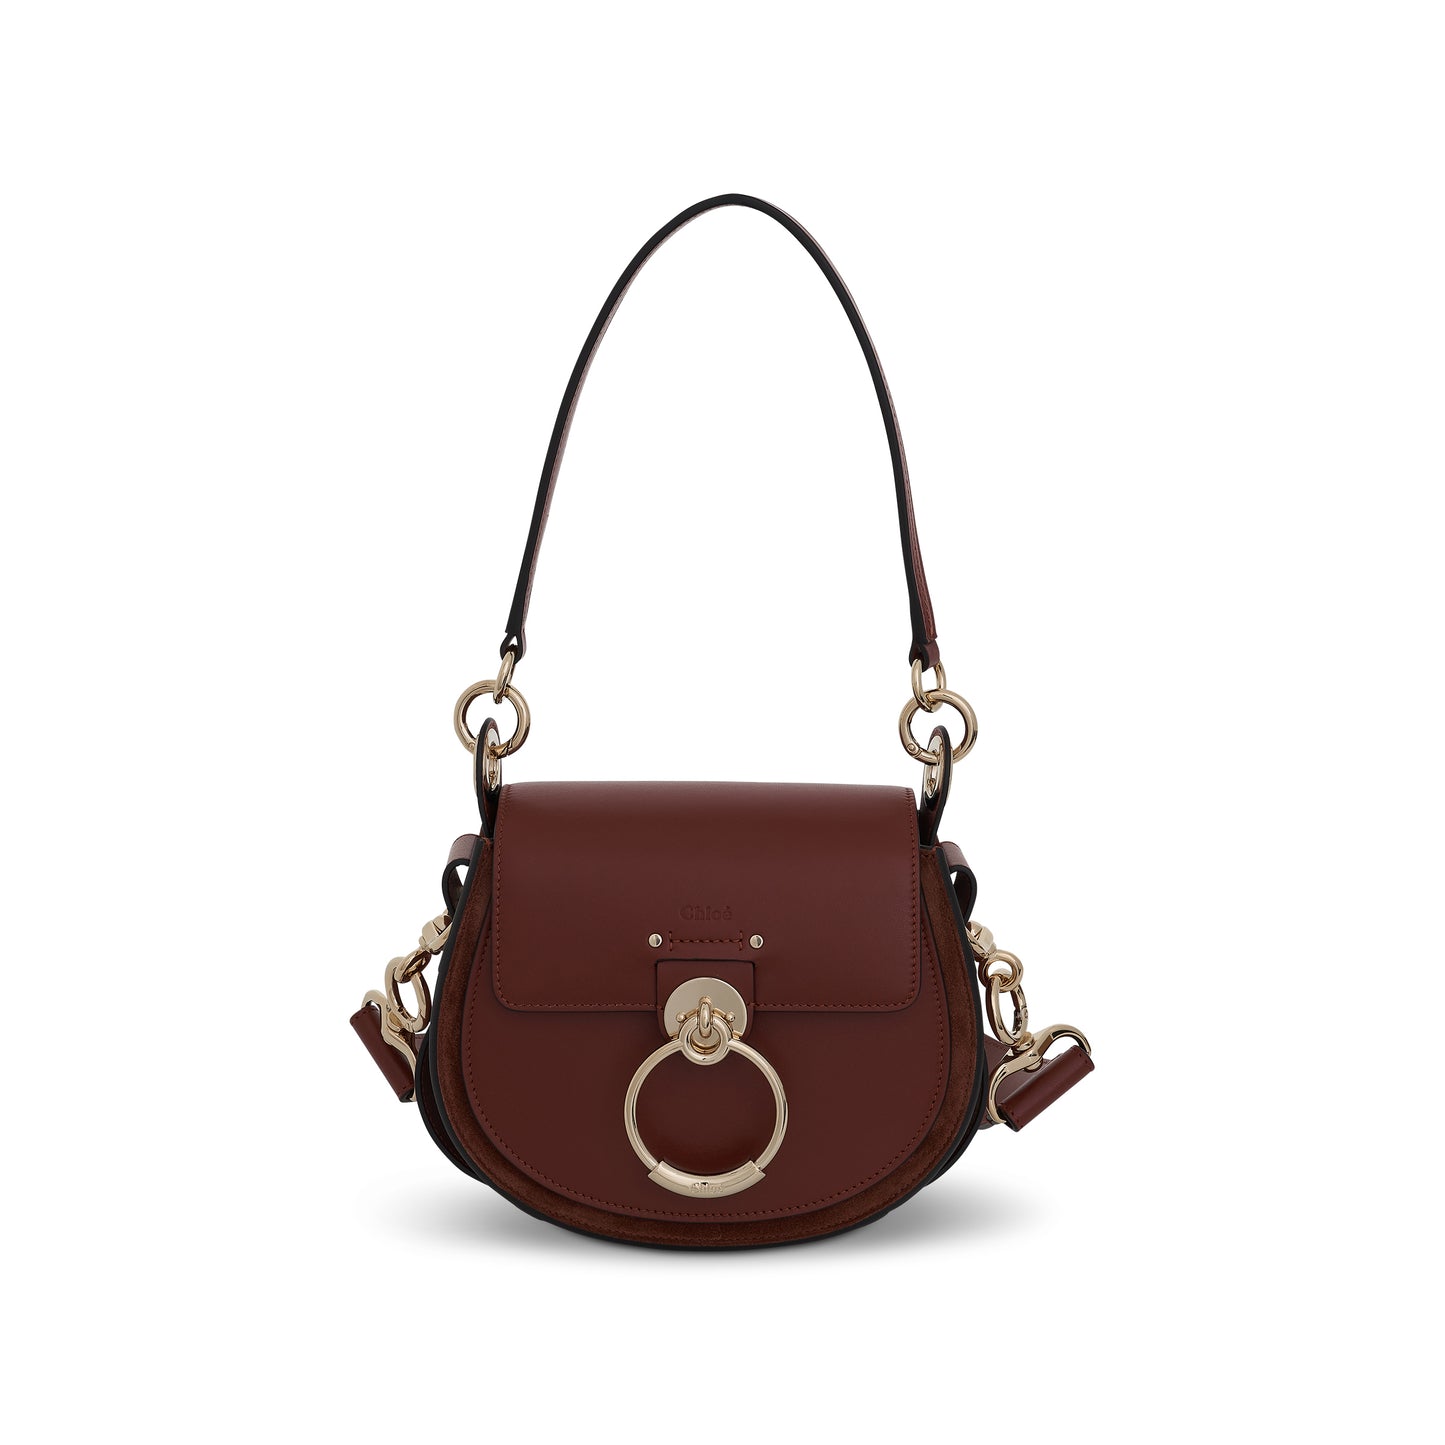 Small Tess Bag in Shiny & Suede Calfskin in Sepia Brown